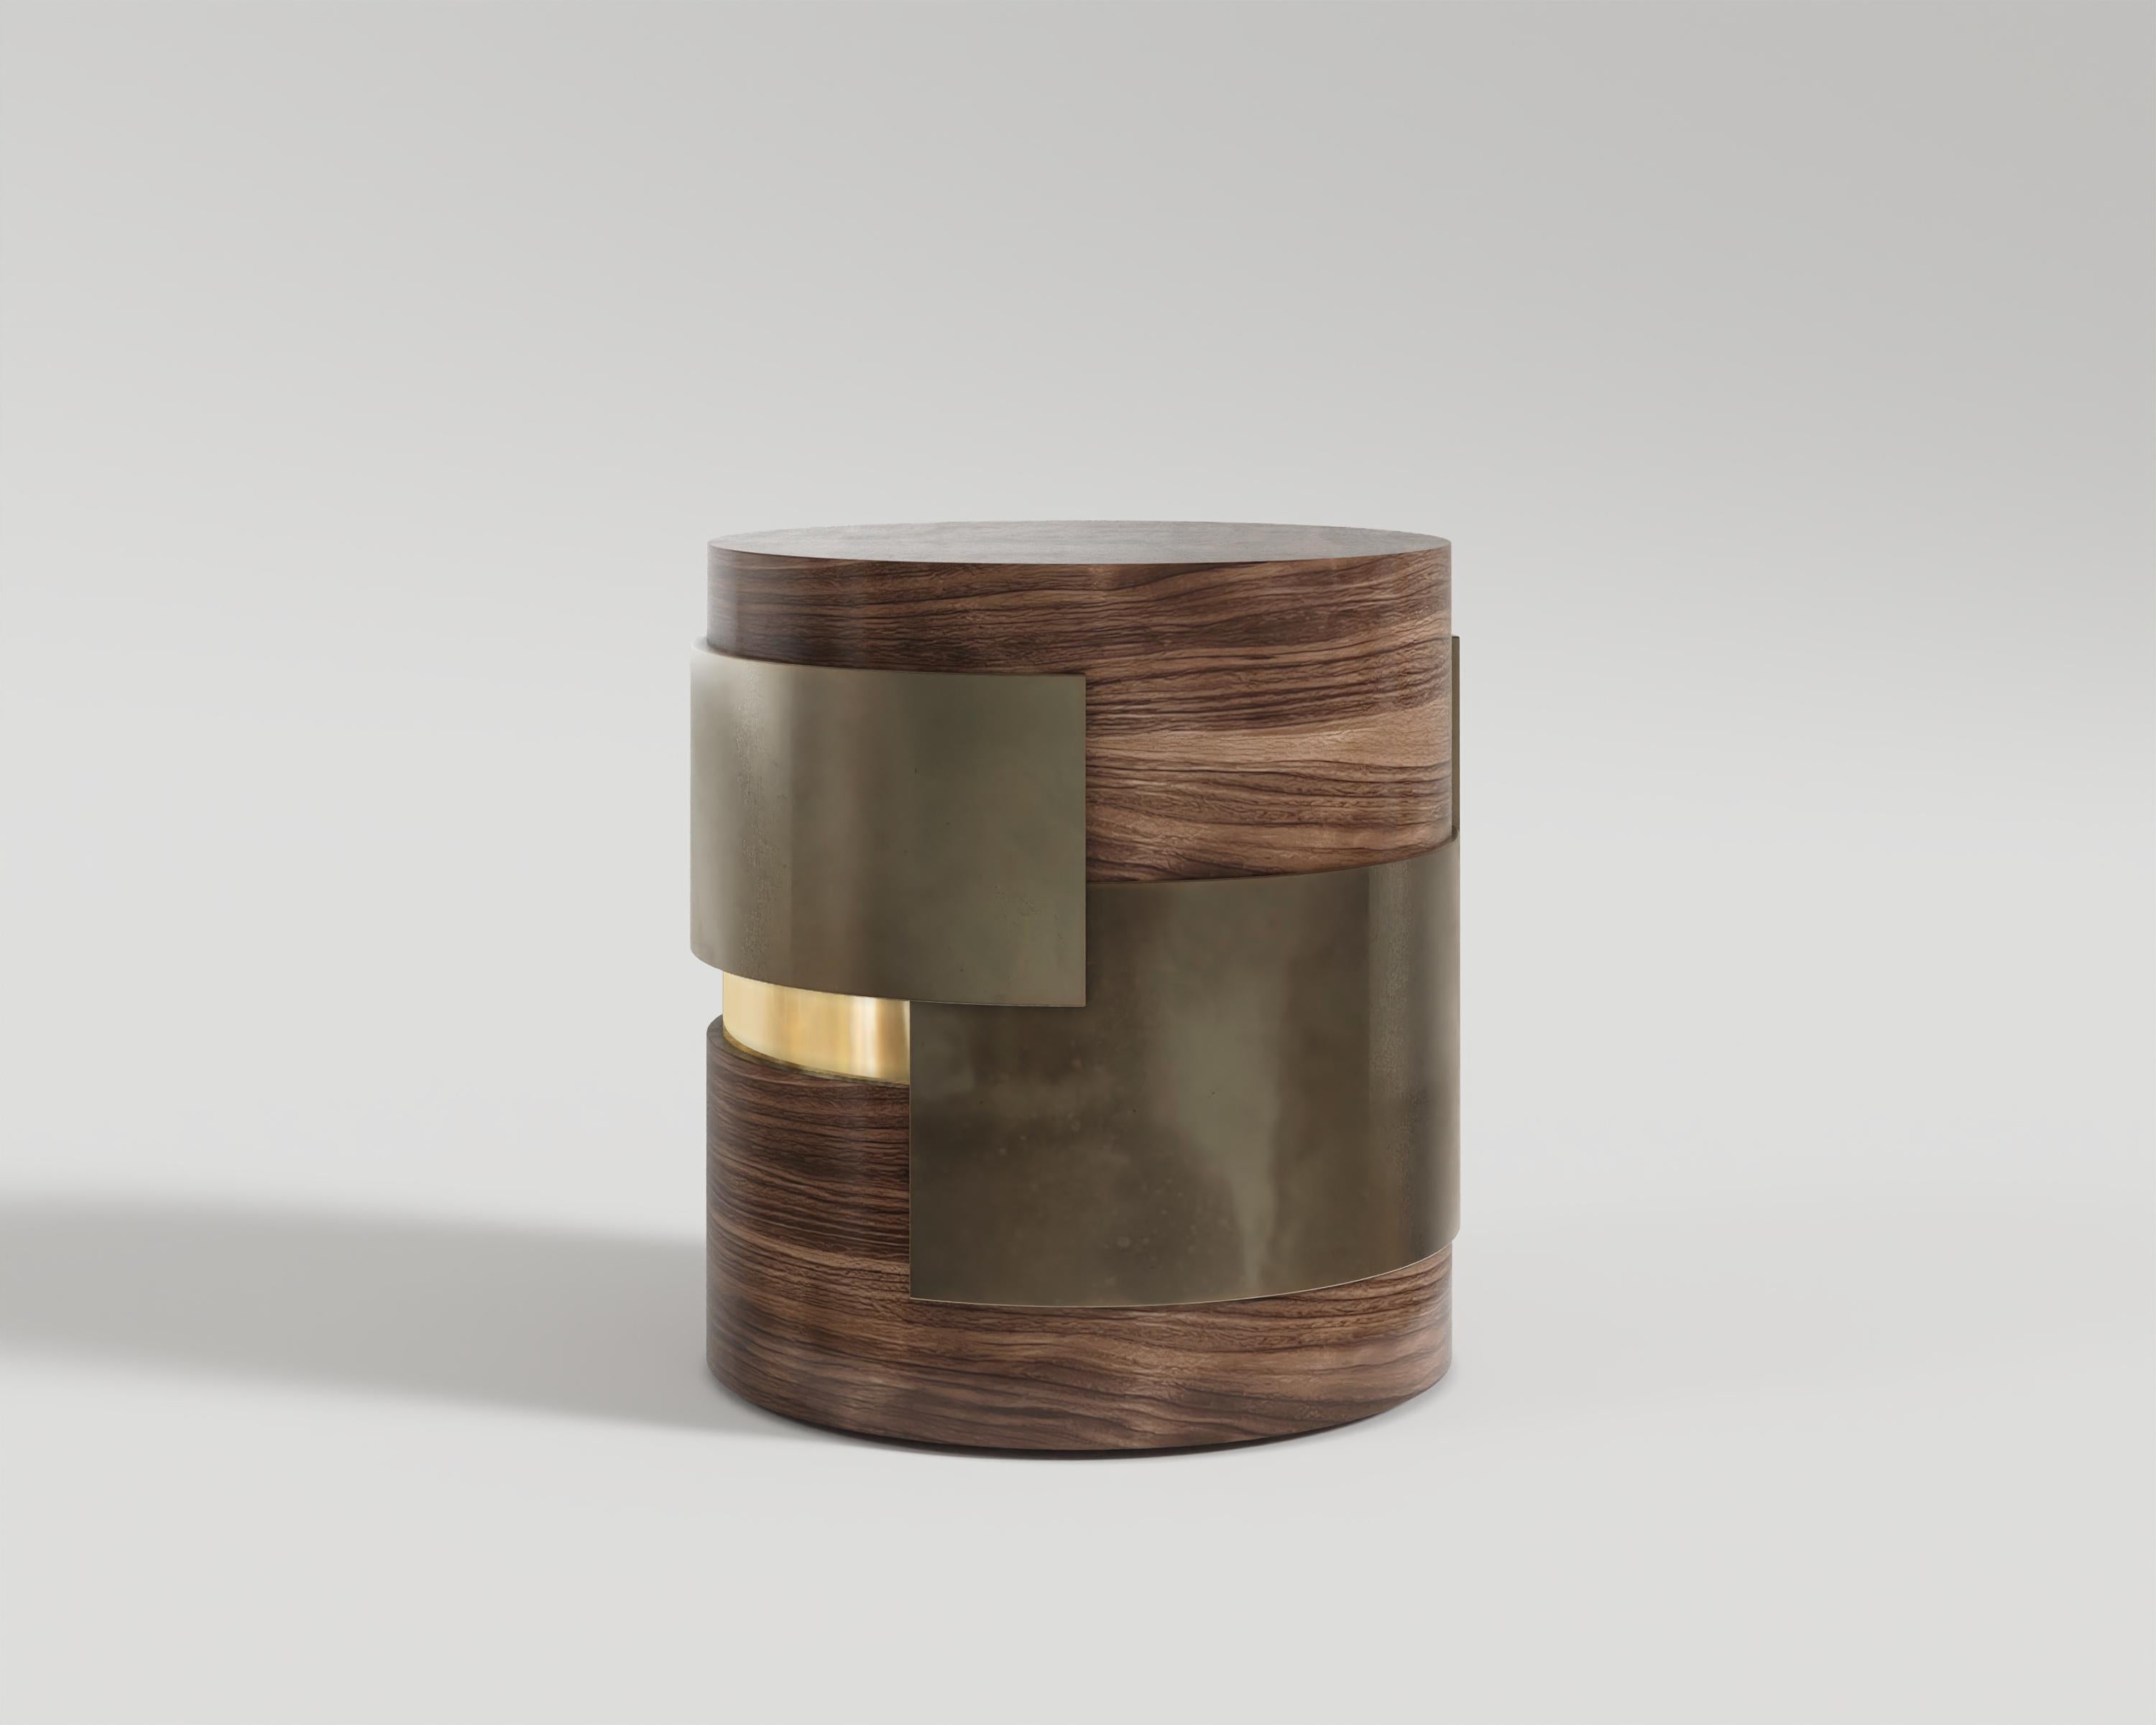 Fragmin Side Table

The Fragmin side table exudes sophistication with its cylindrical design, Patine/Polished bronze accents, and ziricote veneer materials. Its timeless elegance adds a touch of opulence to any space.

Materials and sizes are